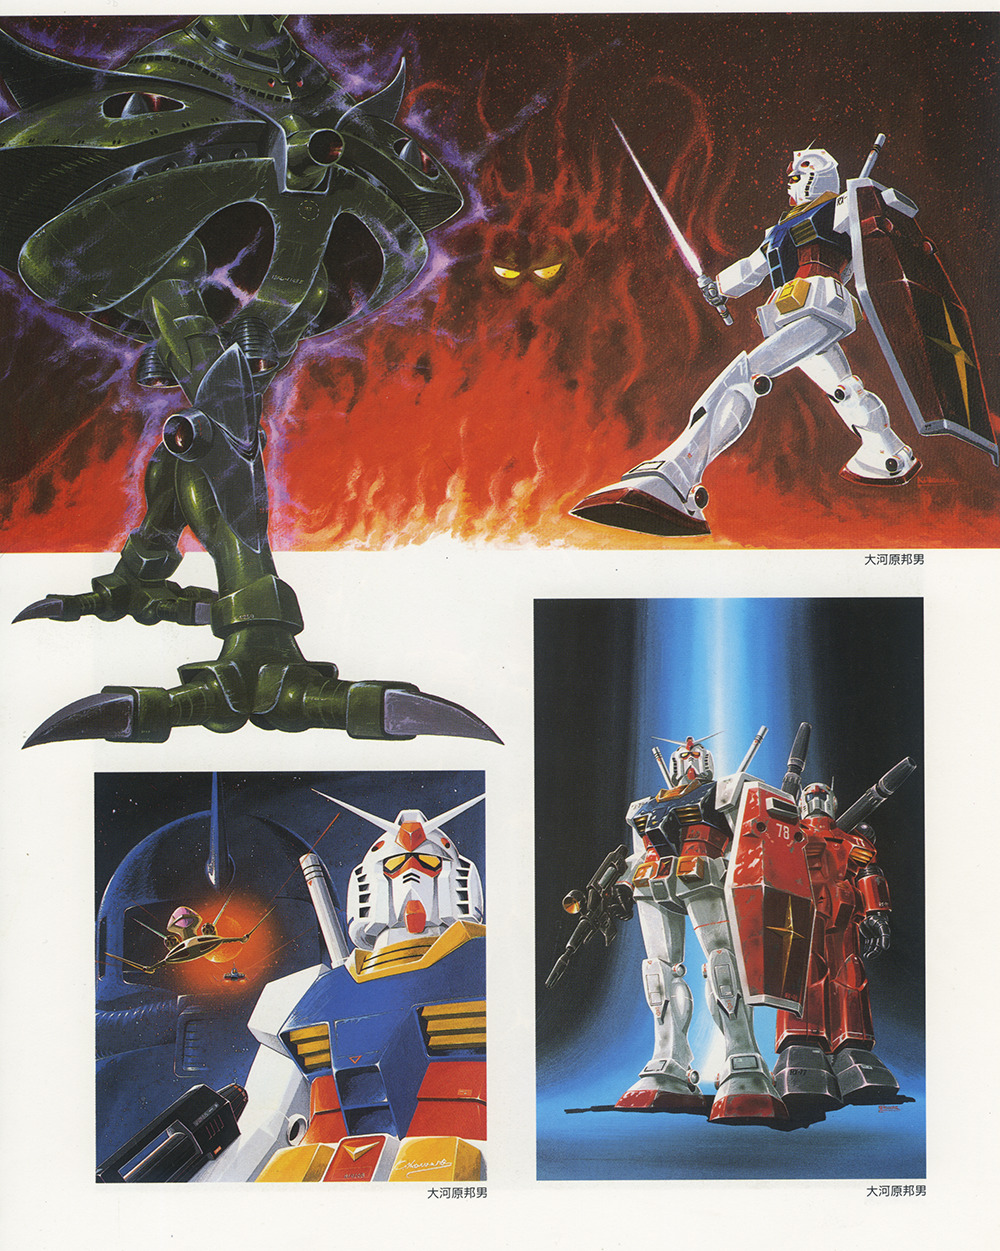 1970s_(style) 1980s_(style) battle beam_cannon beam_rifle big_zam chasing concept_art core_fighter demon dopp duel earth_federation energy_gun fire flying guncannon gundam highres looking_at_viewer mecha mobile_suit mobile_suit_gundam muzzle no_humans official_art ookawara_kunio painting_(medium) production_art retro_artstyle robot rx-78-2 scan science_fiction shield spacecraft starfighter talons traditional_media upper_body v-fin walker_(robot) weapon when_you_see_it yellow_eyes zaku_ii_s_char_custom zeon